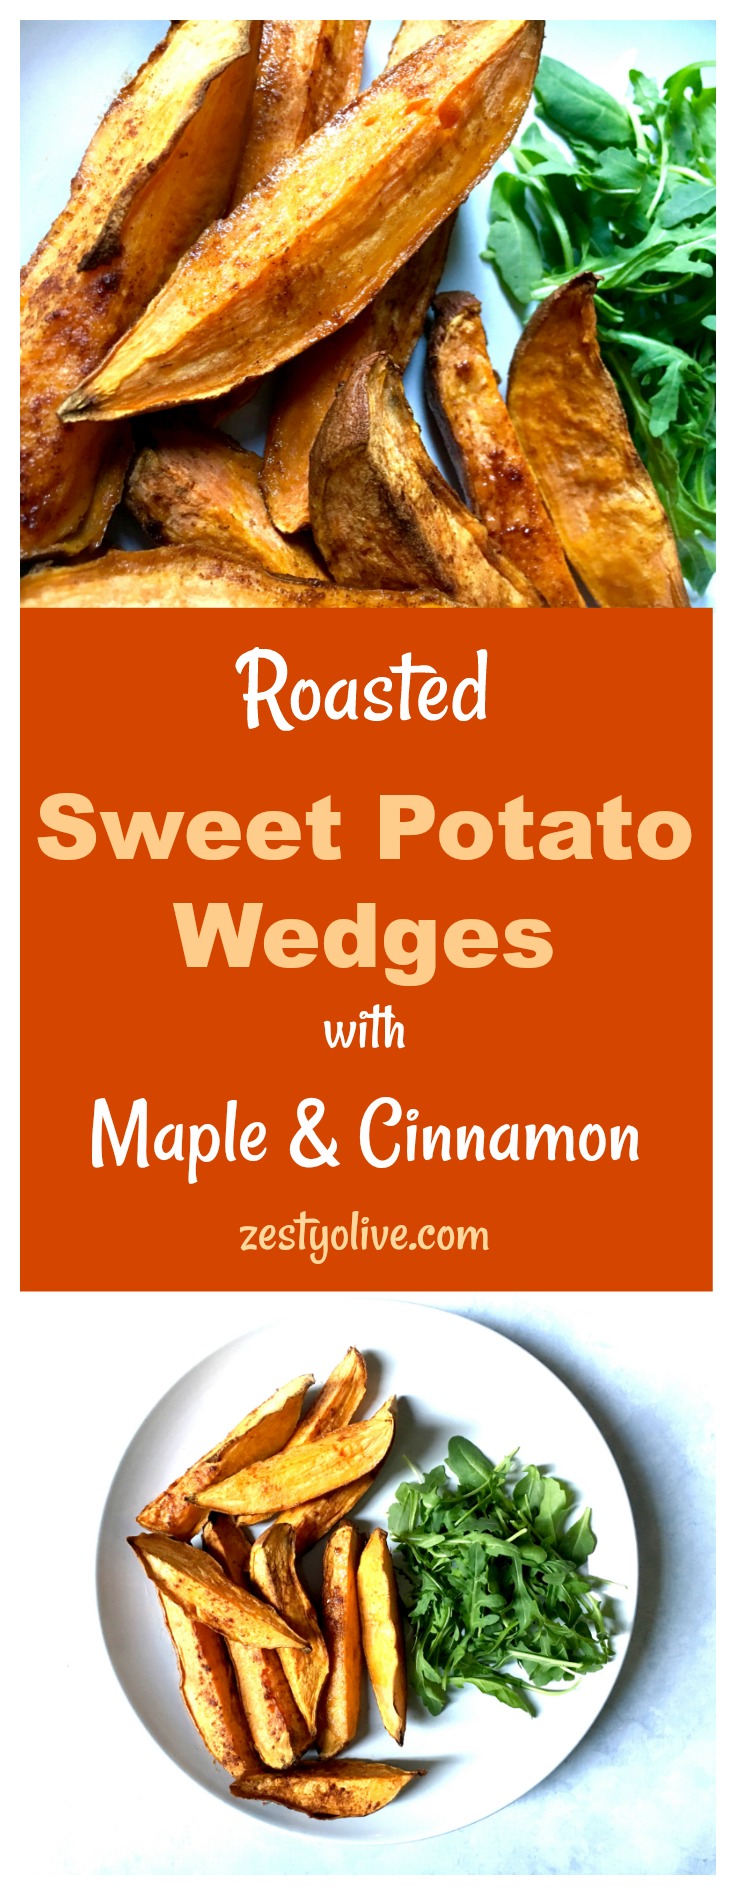 Roasted Sweet Potato Wedges with Maple and Cinnamon